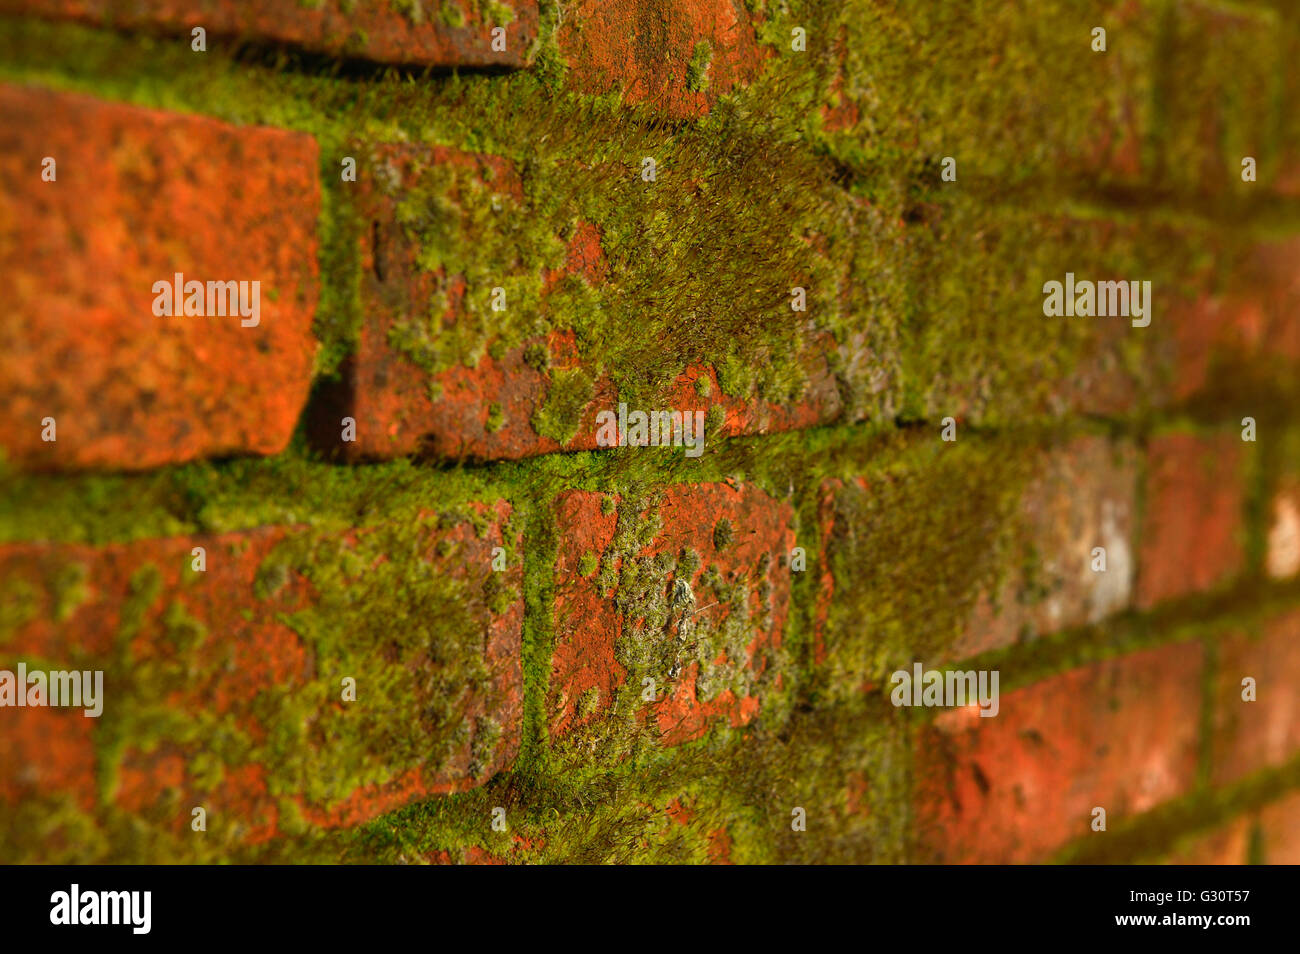 Natural moss grows over the pattern of bricks on a tall garden wall Stock Photo